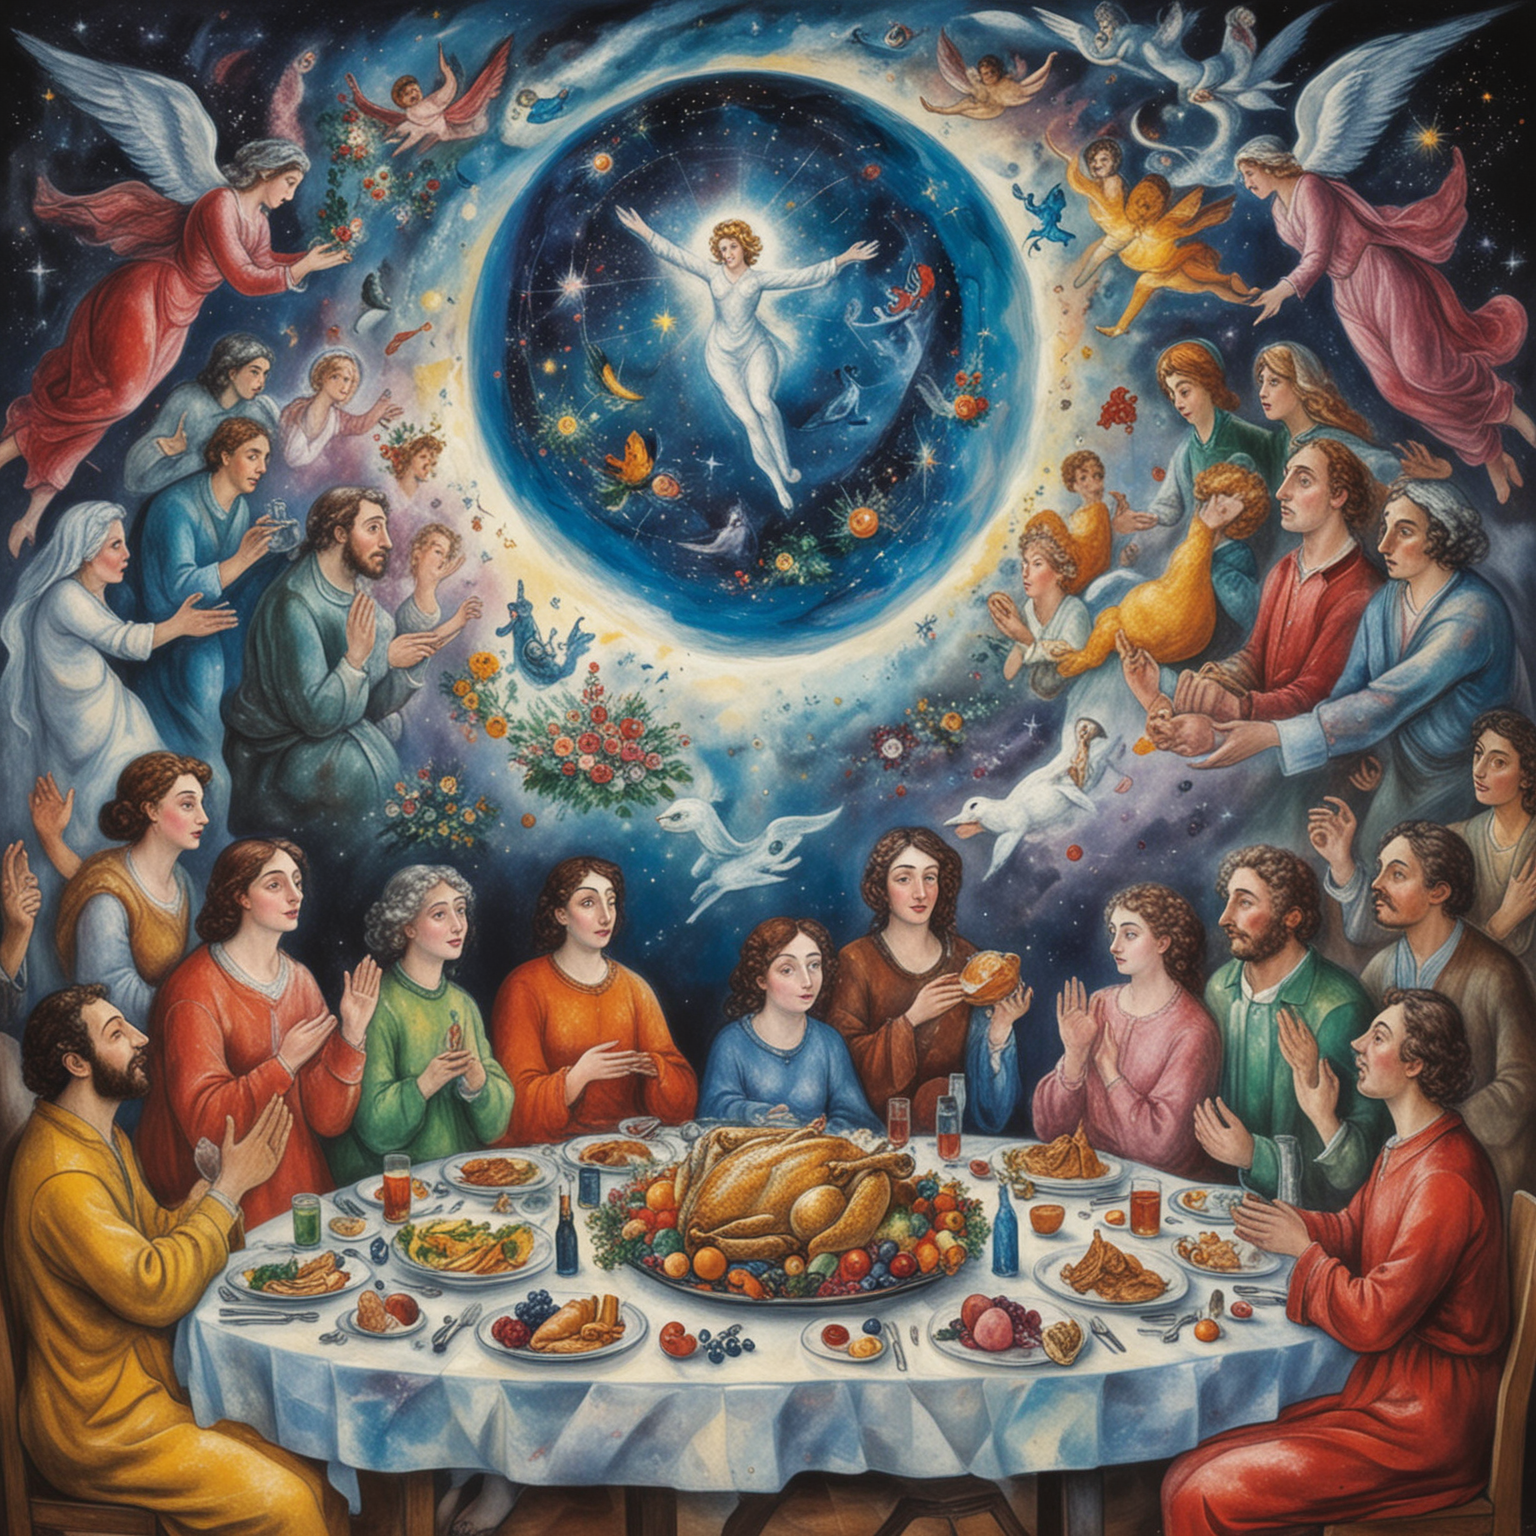 Chagall style cosmic heavenly feast with men women and children less people


